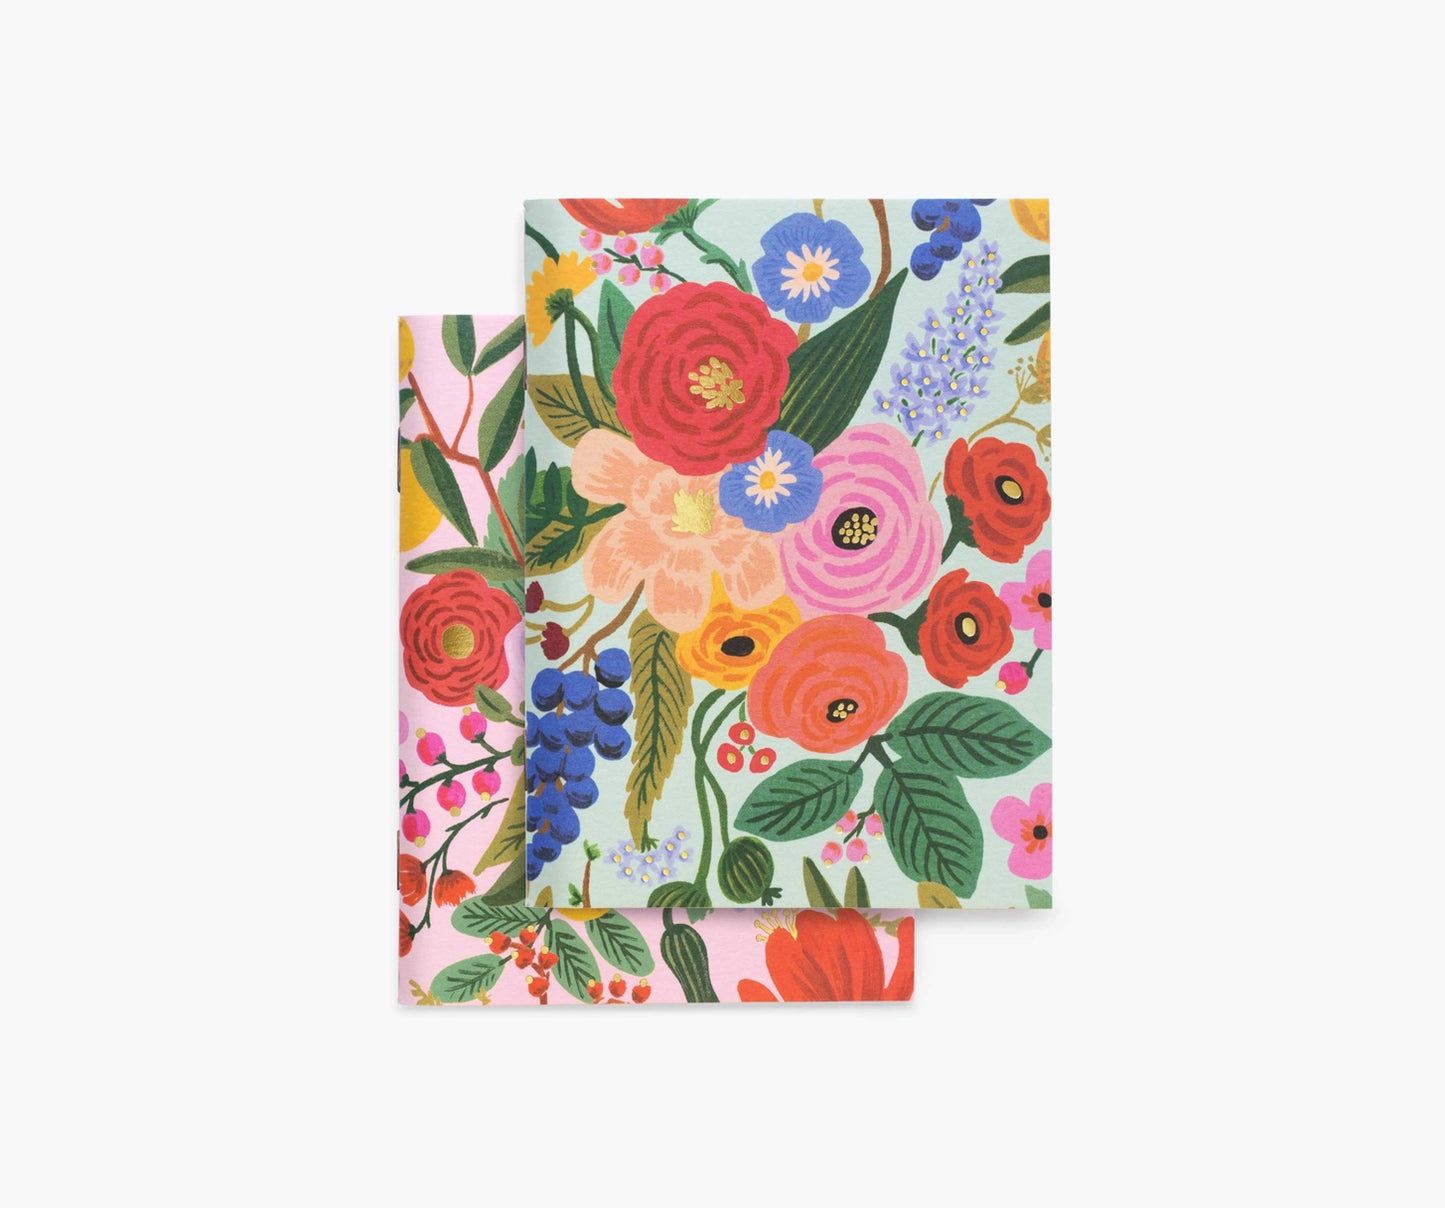 Pair of 2 Garden Party Pocket Notebooks